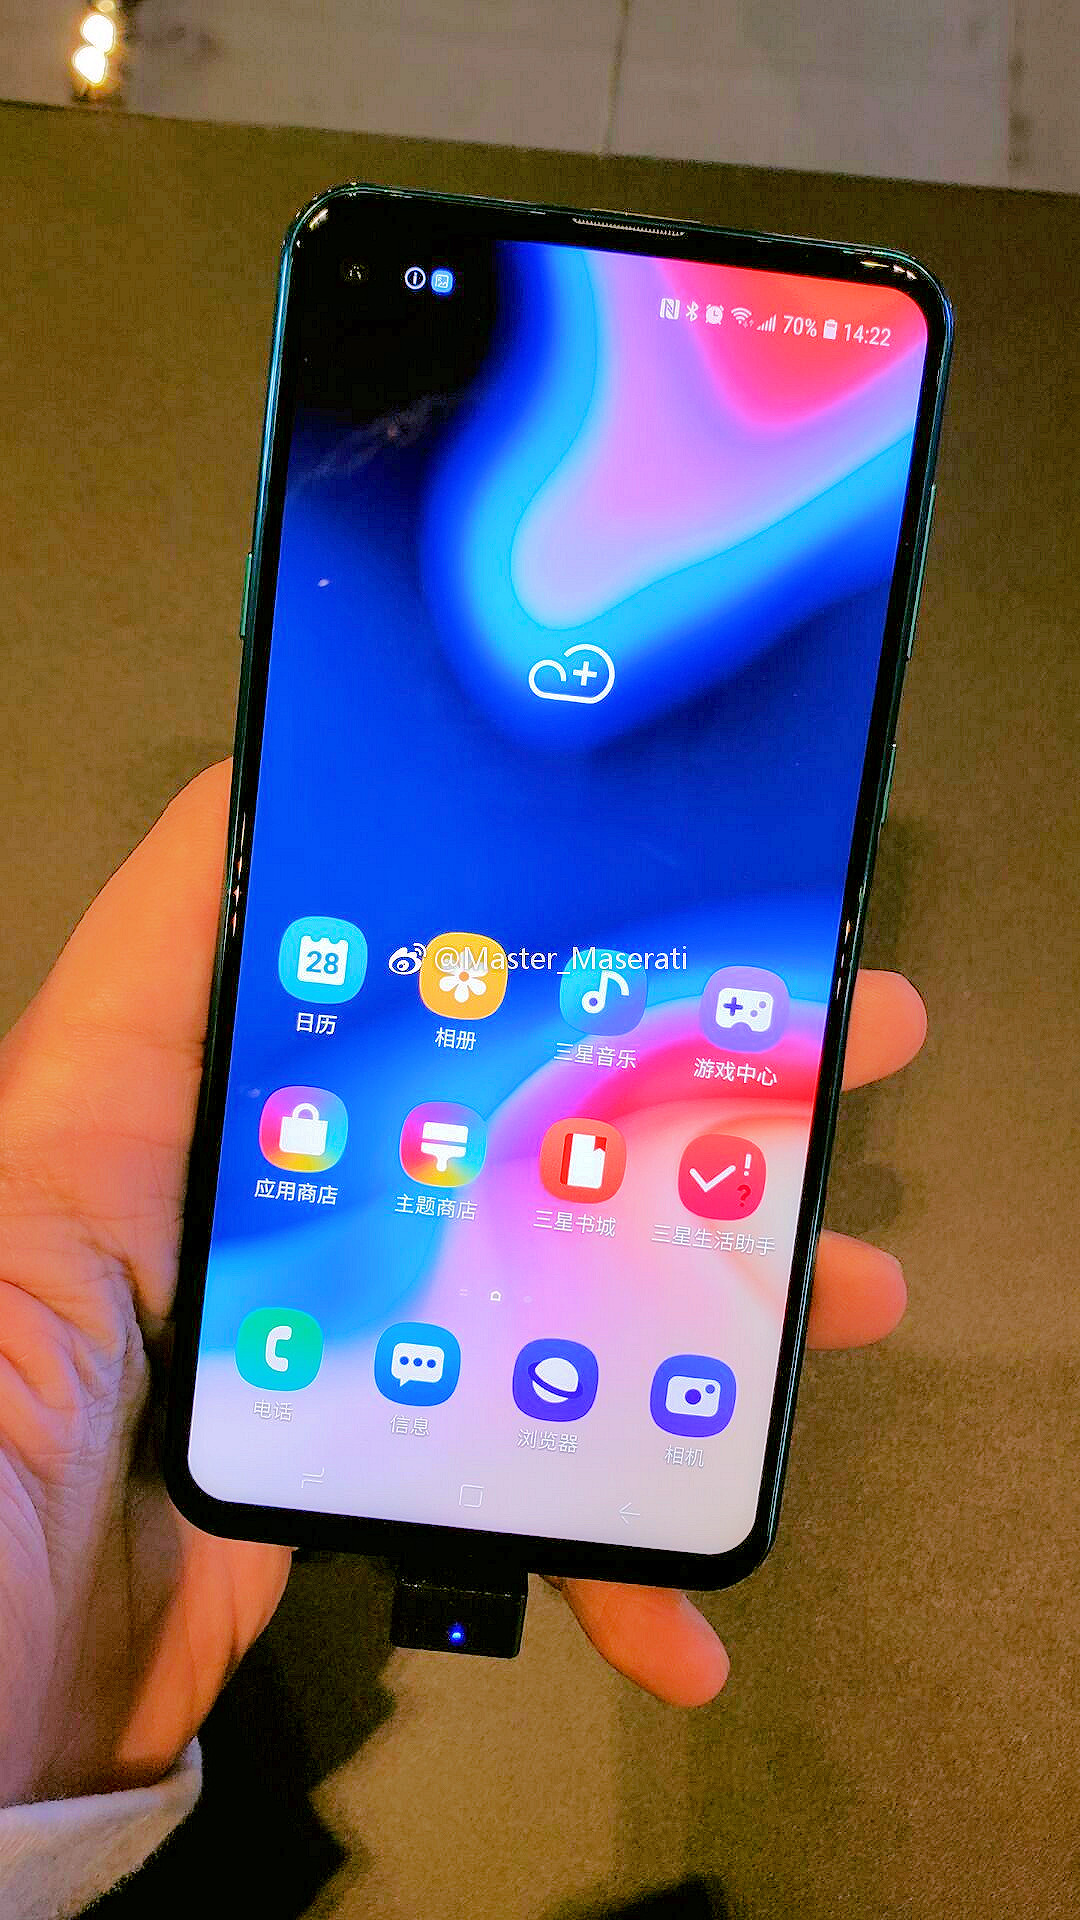 Live Samsung Galaxy A8s Picture With Infinity O Camera Leaks Ahead